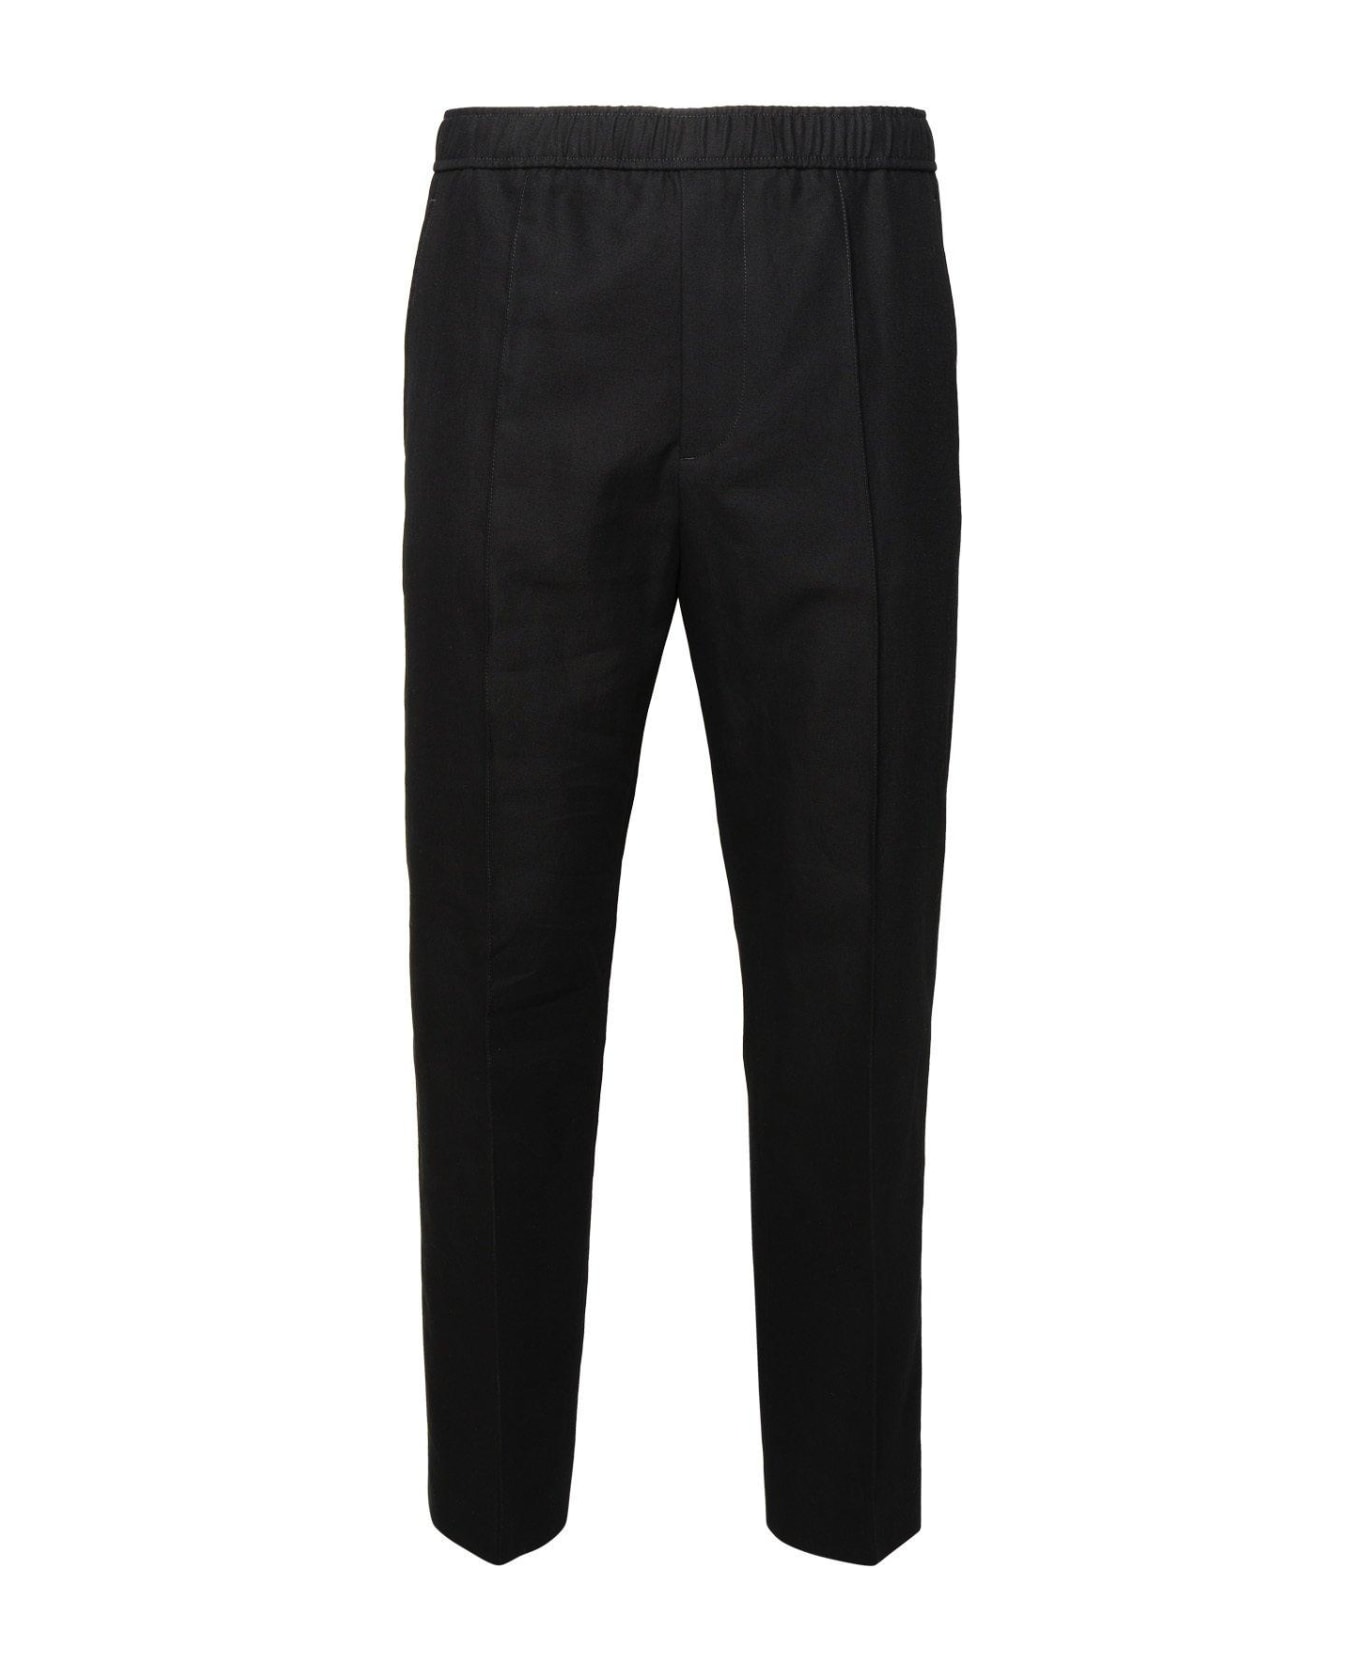 Lanvin Mid-rise Tapered Cropped Trousers - Nero ボトムス